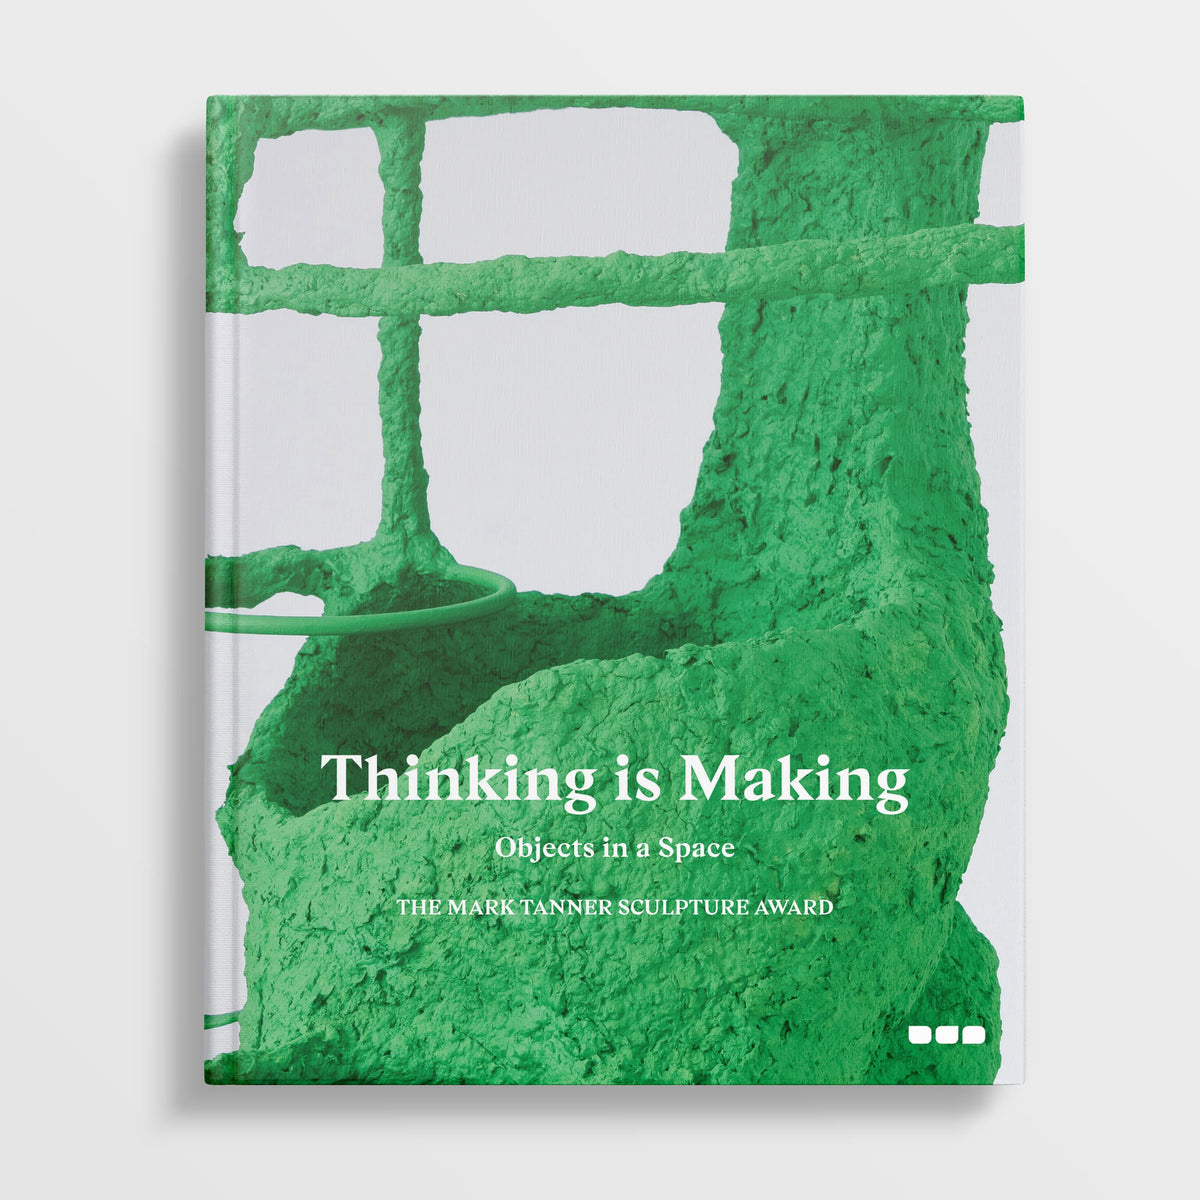 Cover of a book titled "Thinking is Making: Objects in Space The Mark Tanner Sculpture Award," spotlighting contemporary sculptural practice with a green textured sculpture crafted by emerging sculptors. Published by Black Dog Online.